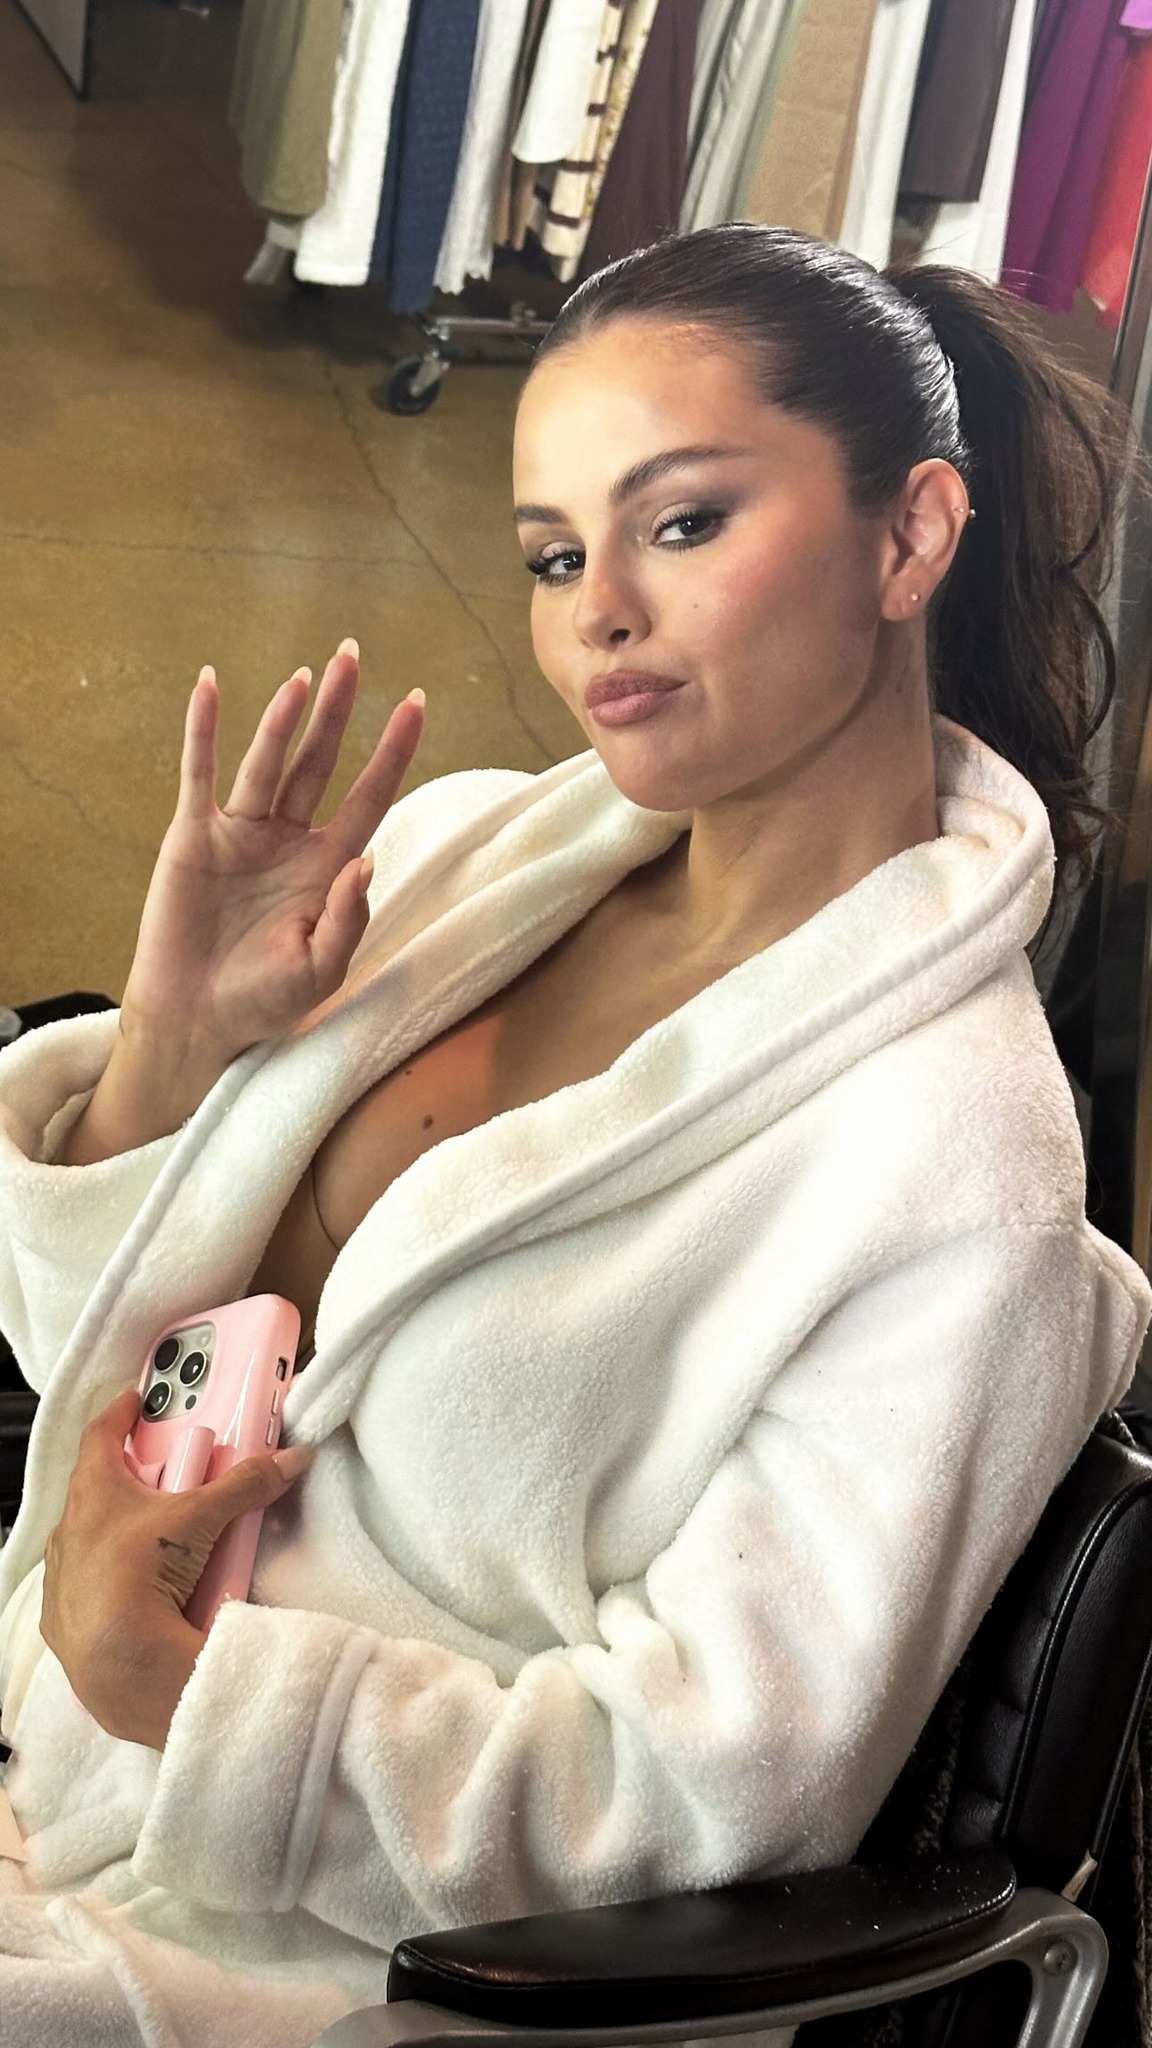 Selena Gomez suffered a small wardrobe malfunction after her white robe showed off a little more cleavage than intended